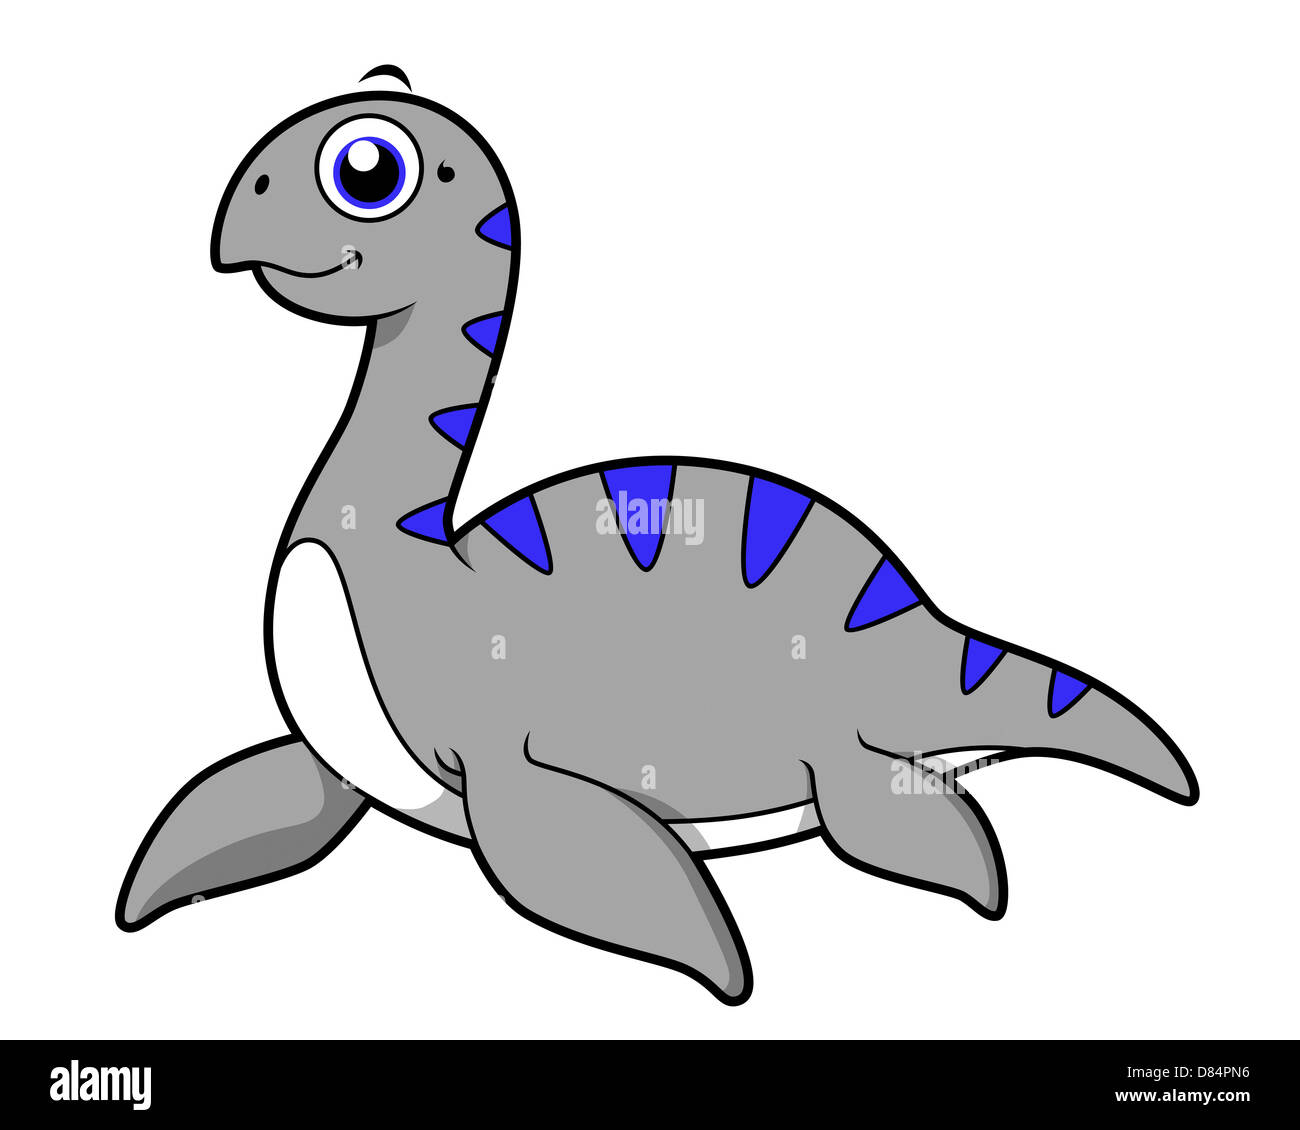 Cute illustration of a Loch Ness Monster. Stock Photo